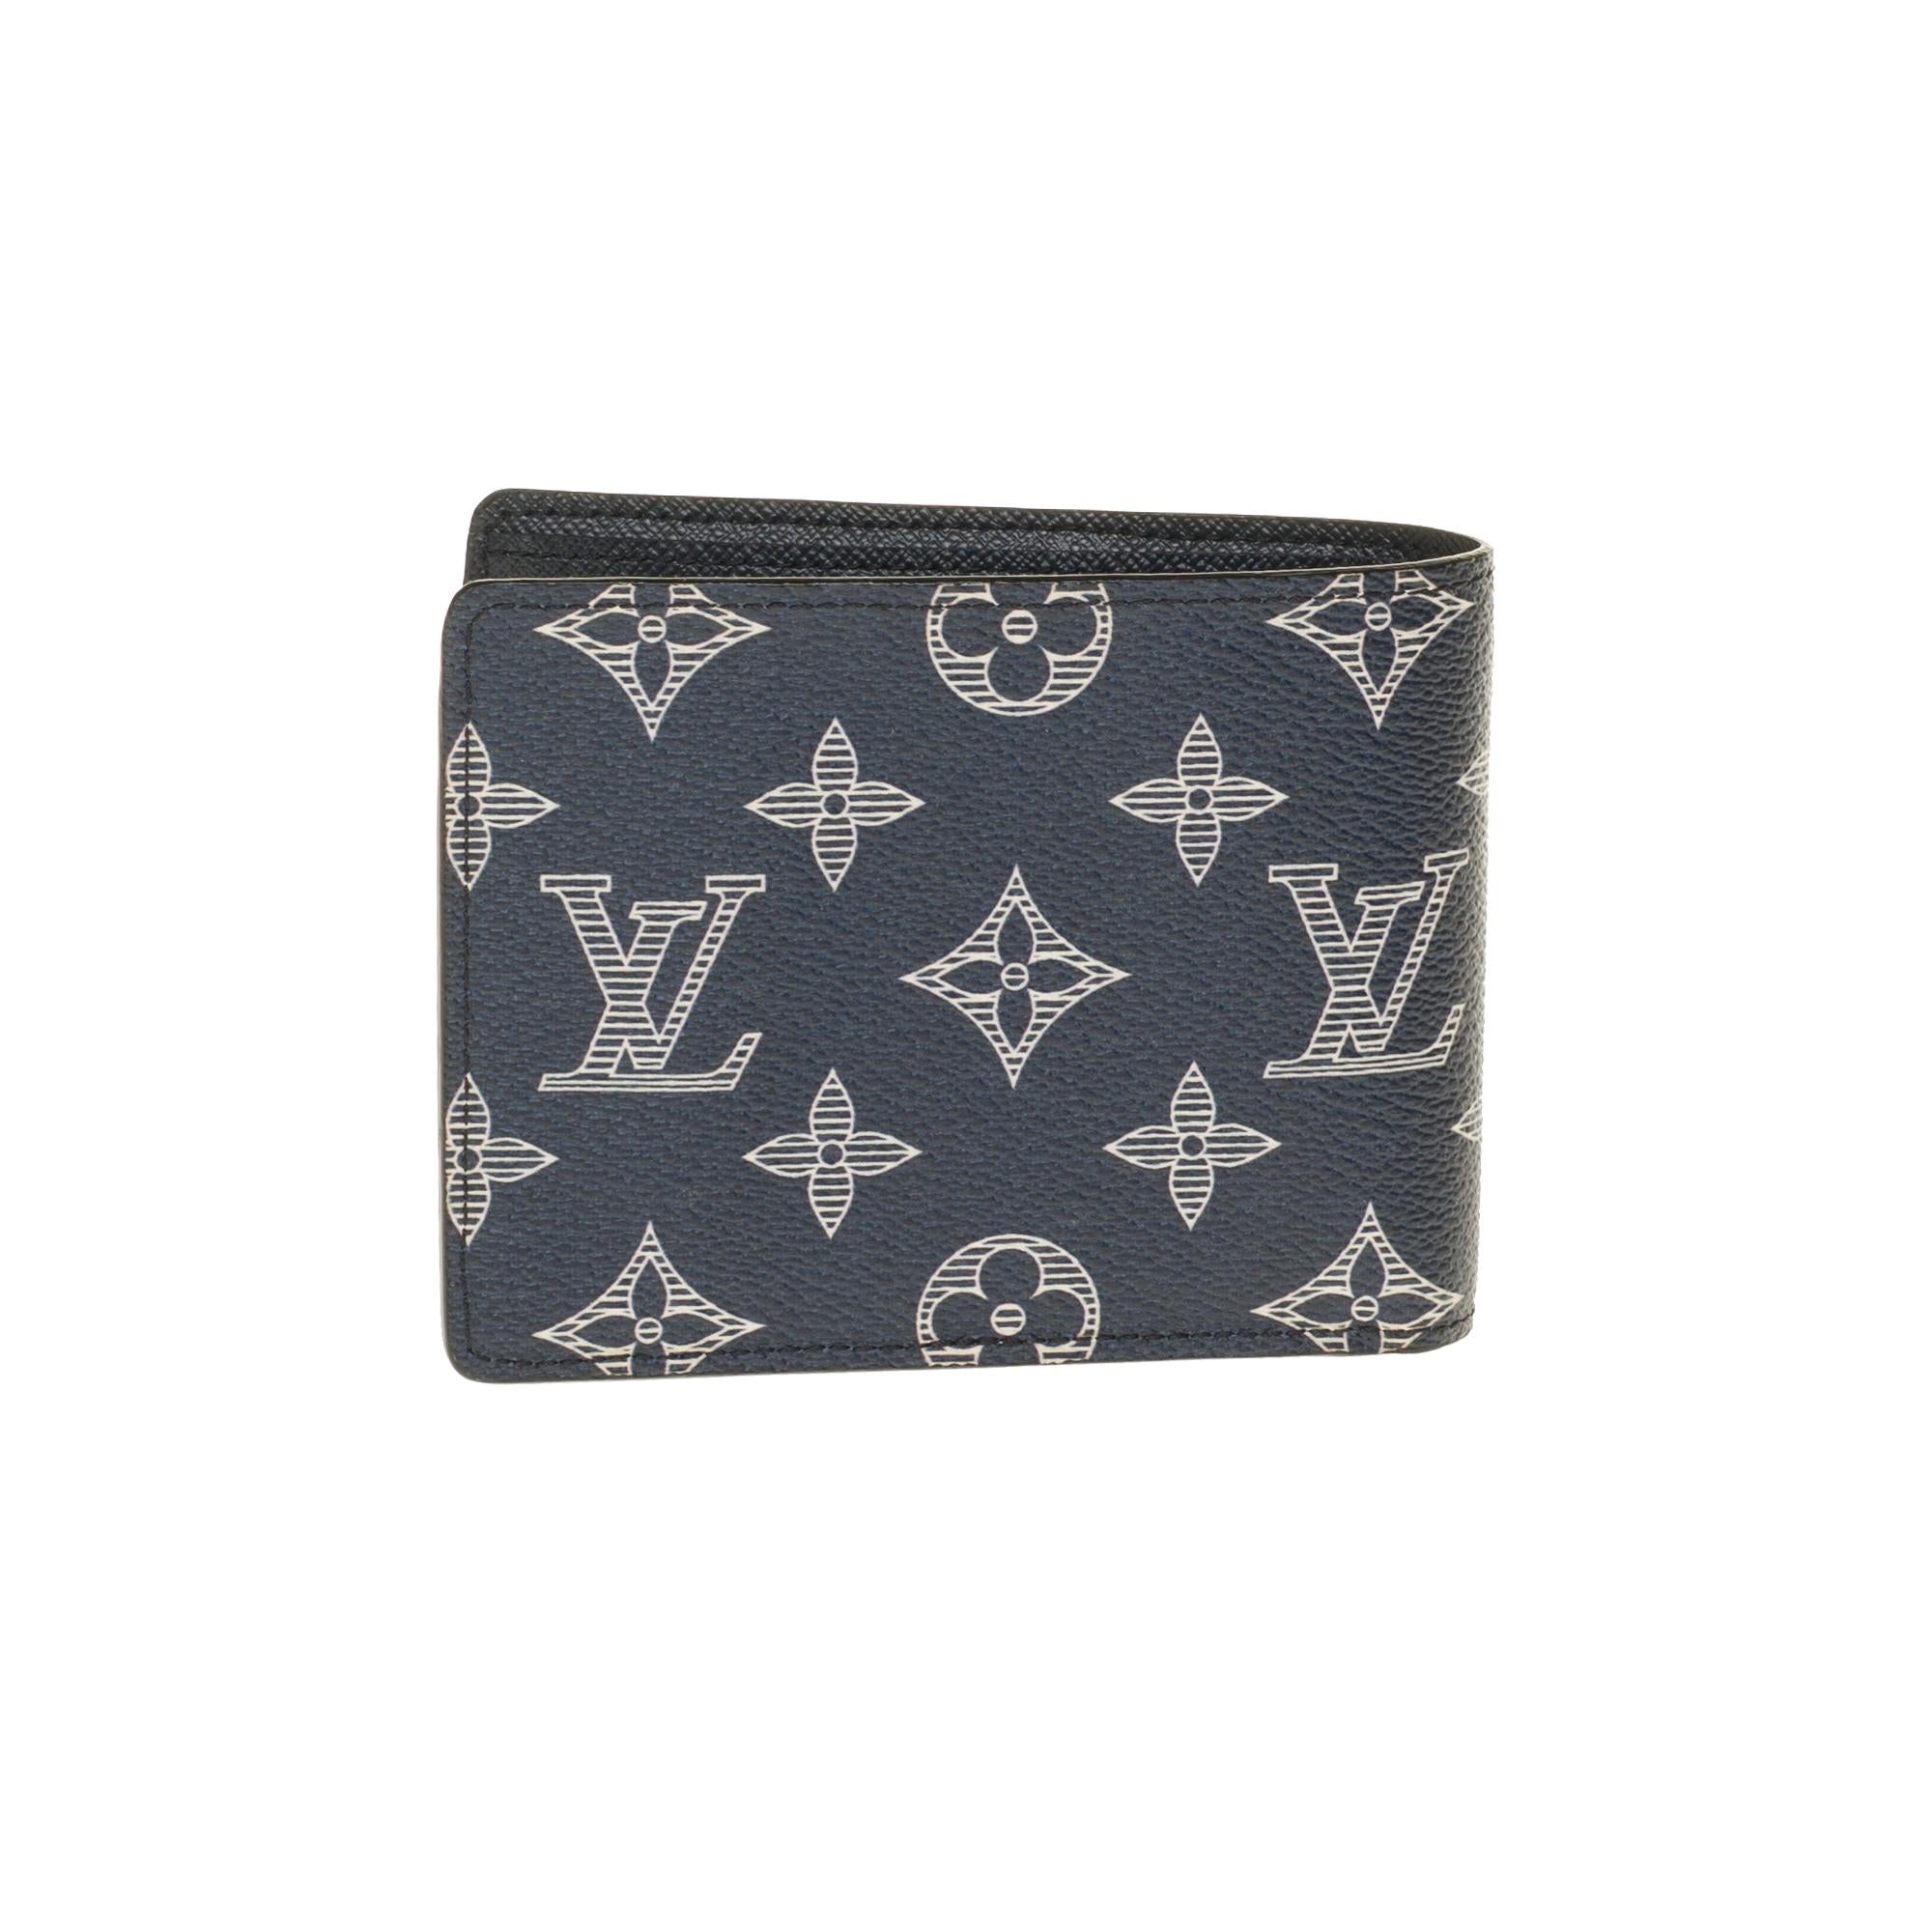 Rare collectible piece!

Louis Vuitton Chapman Brothers wallet in coated canvas with «zebra» pattern
Signature: Louis Vuitton, Made in France